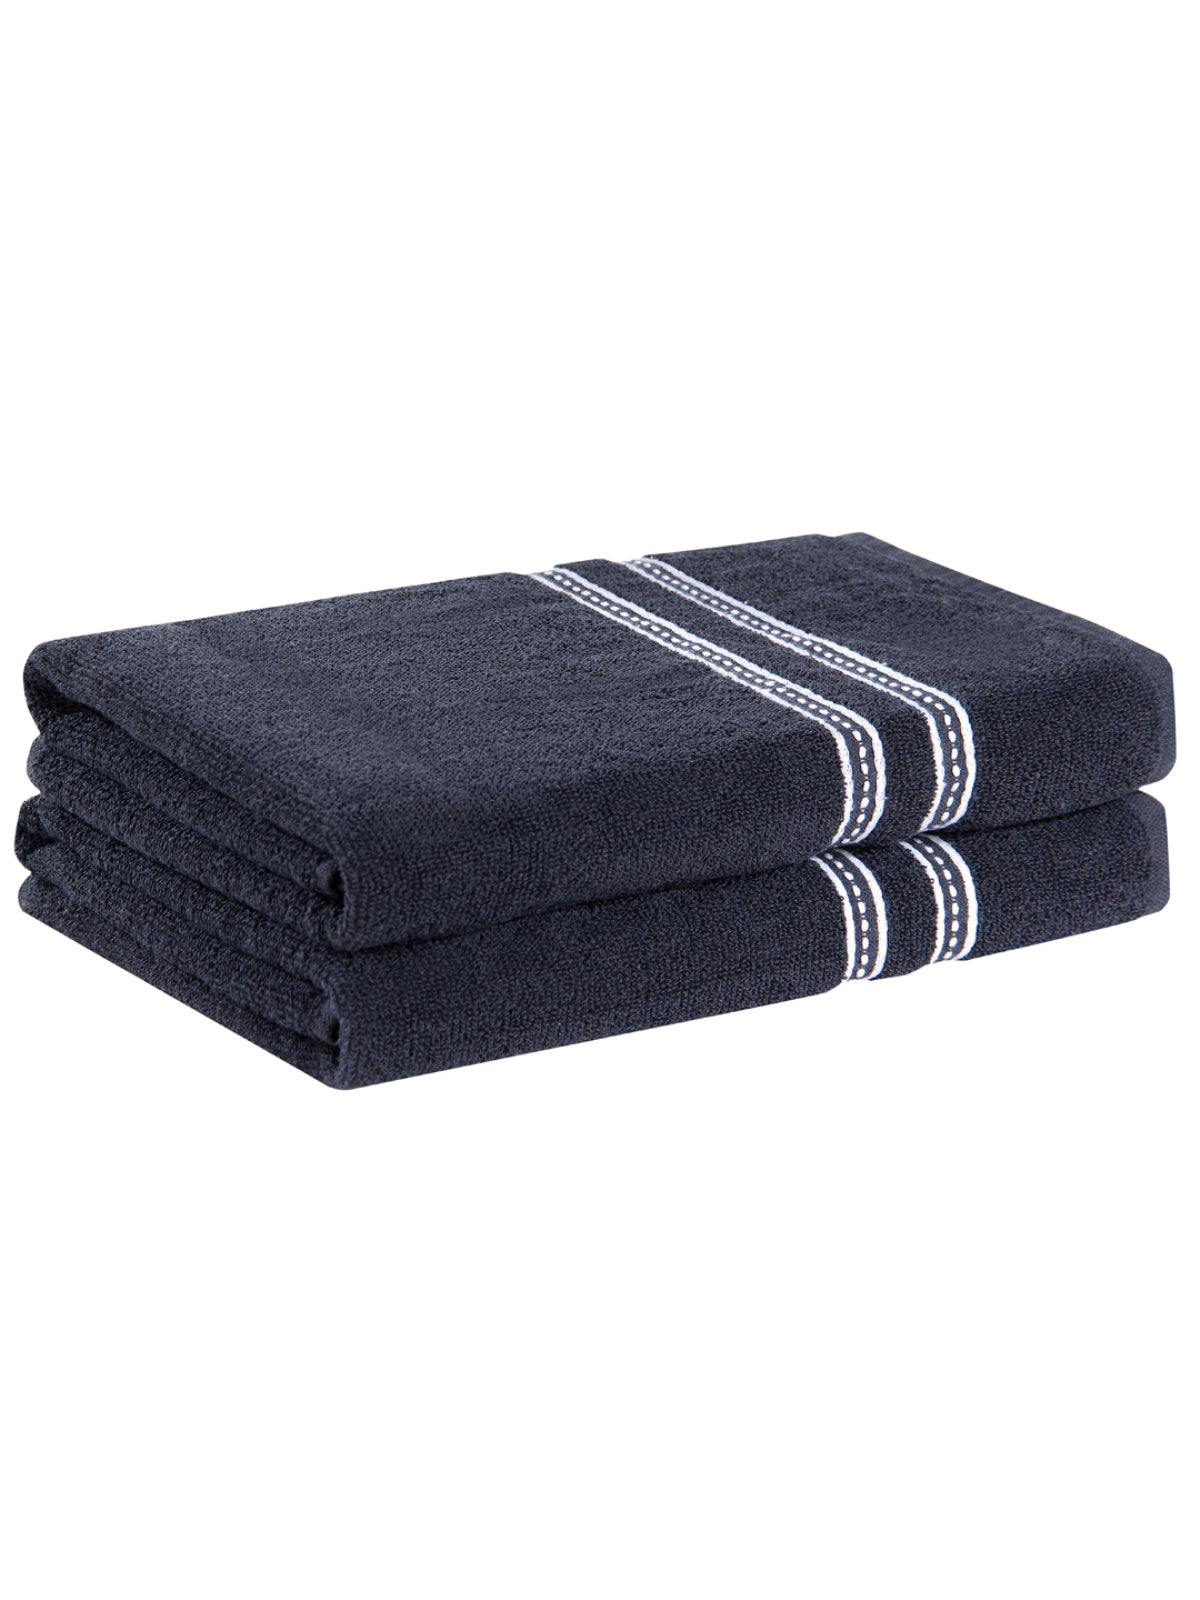 Green 400 GSM Cotton Bath Towel - Pack of 2